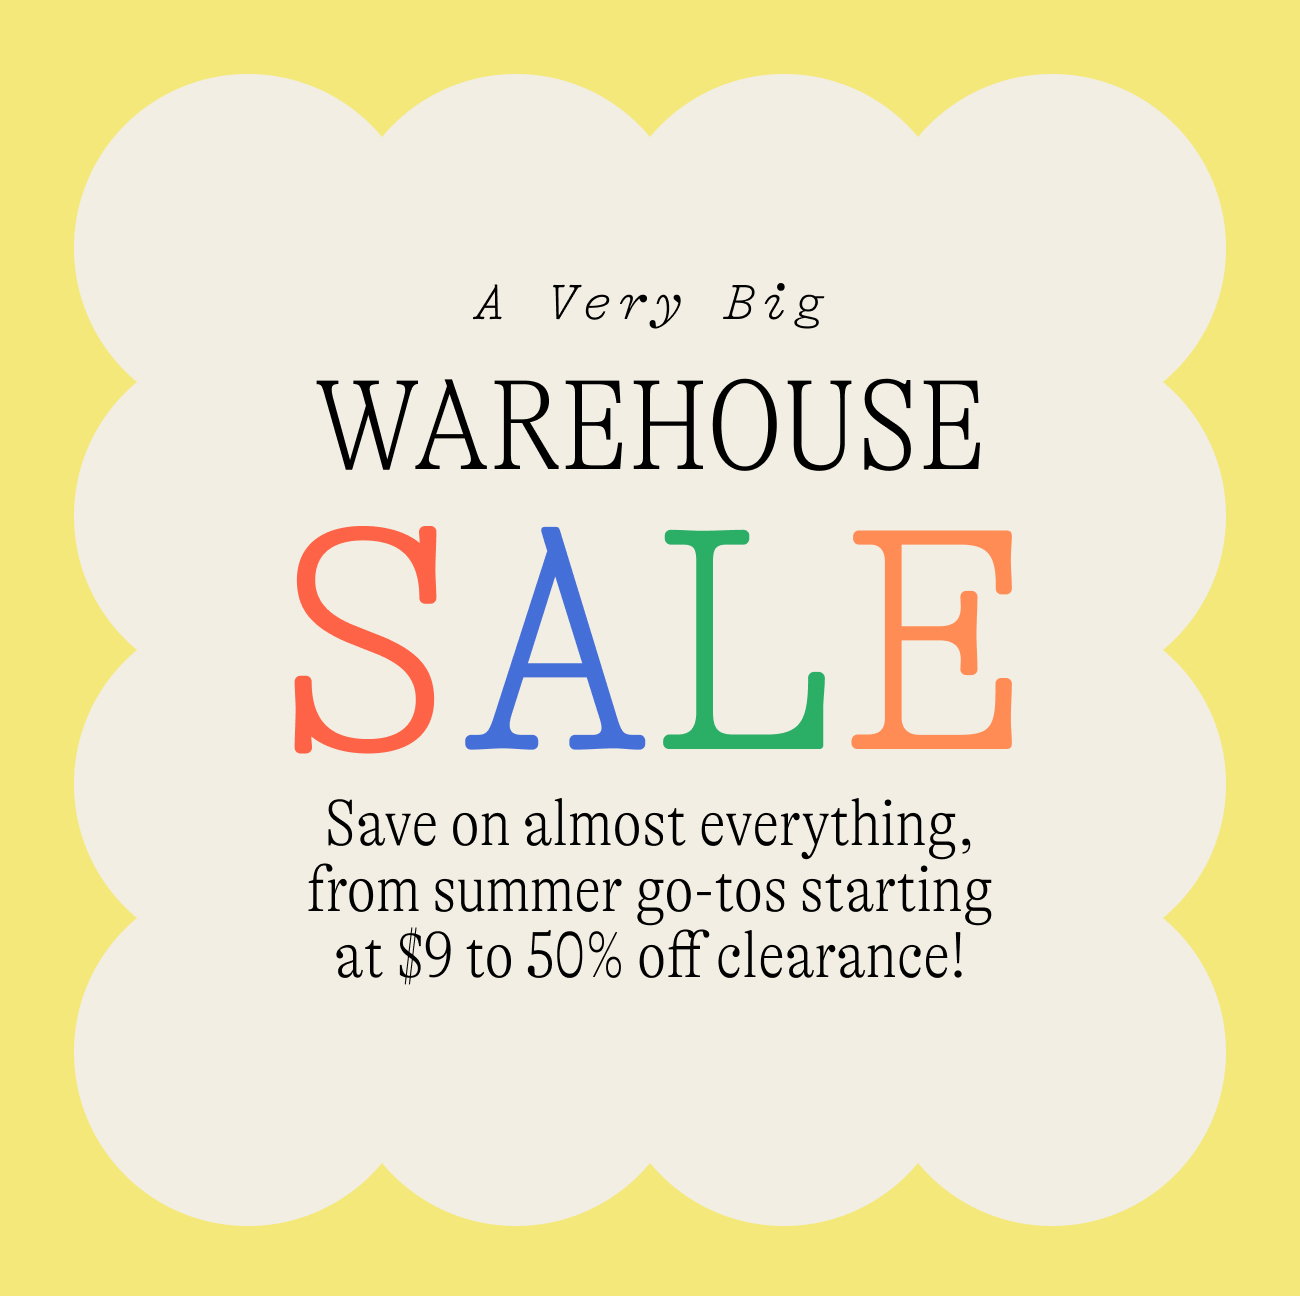 A very big warehouse sale! Today’s the last day to save on must-have summer styles, including 50% off ALL clearance!